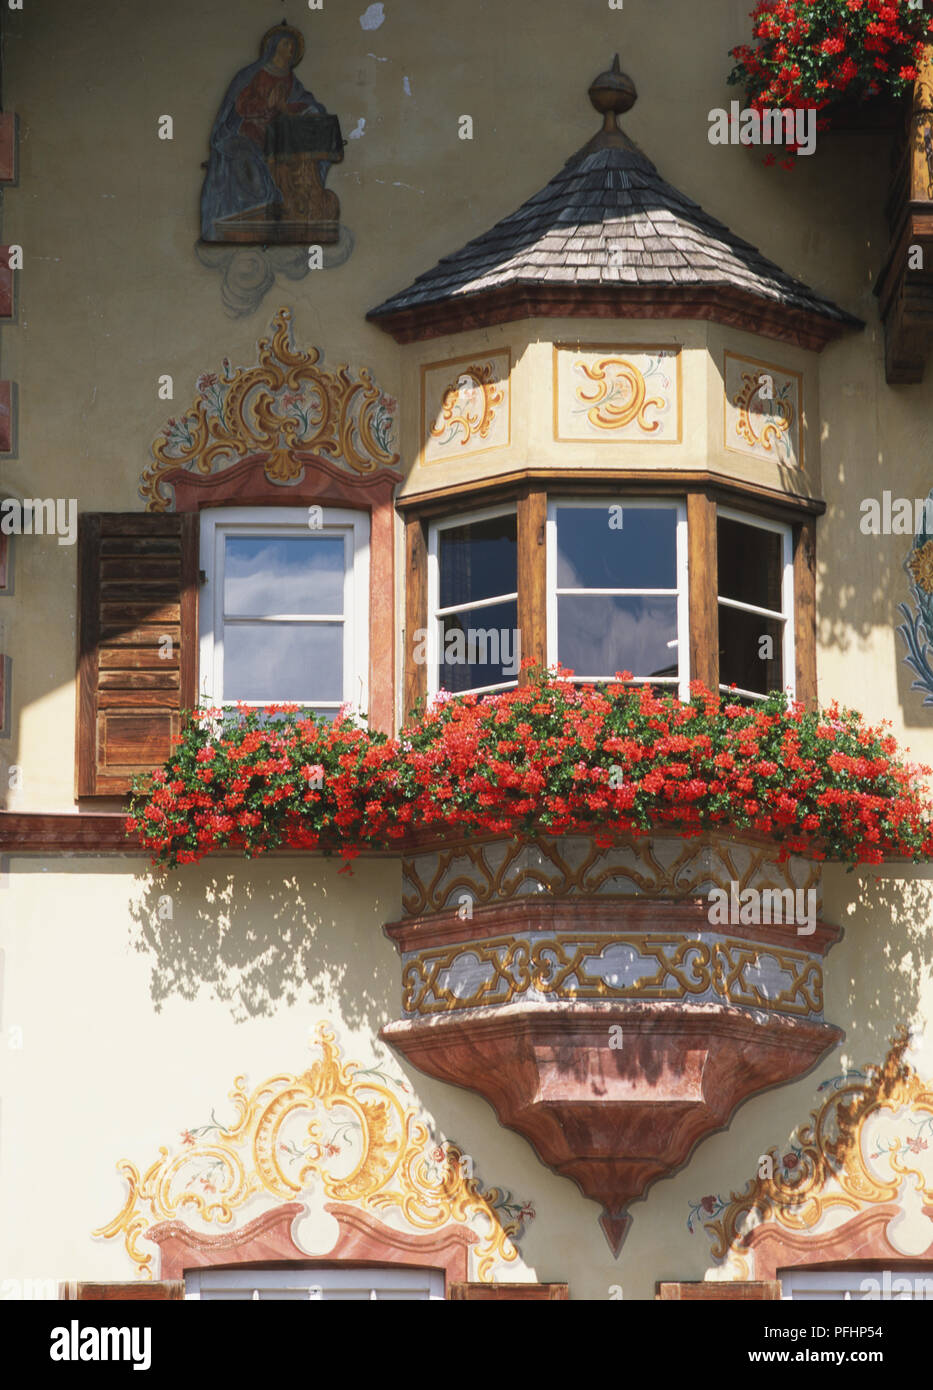 Germany, Upper Bavaria, Neubeuren, oriel window on upper facade of inn covered with colourful L?ftlmalere, a trompe-l'oeil style of house-painting. Stock Photo